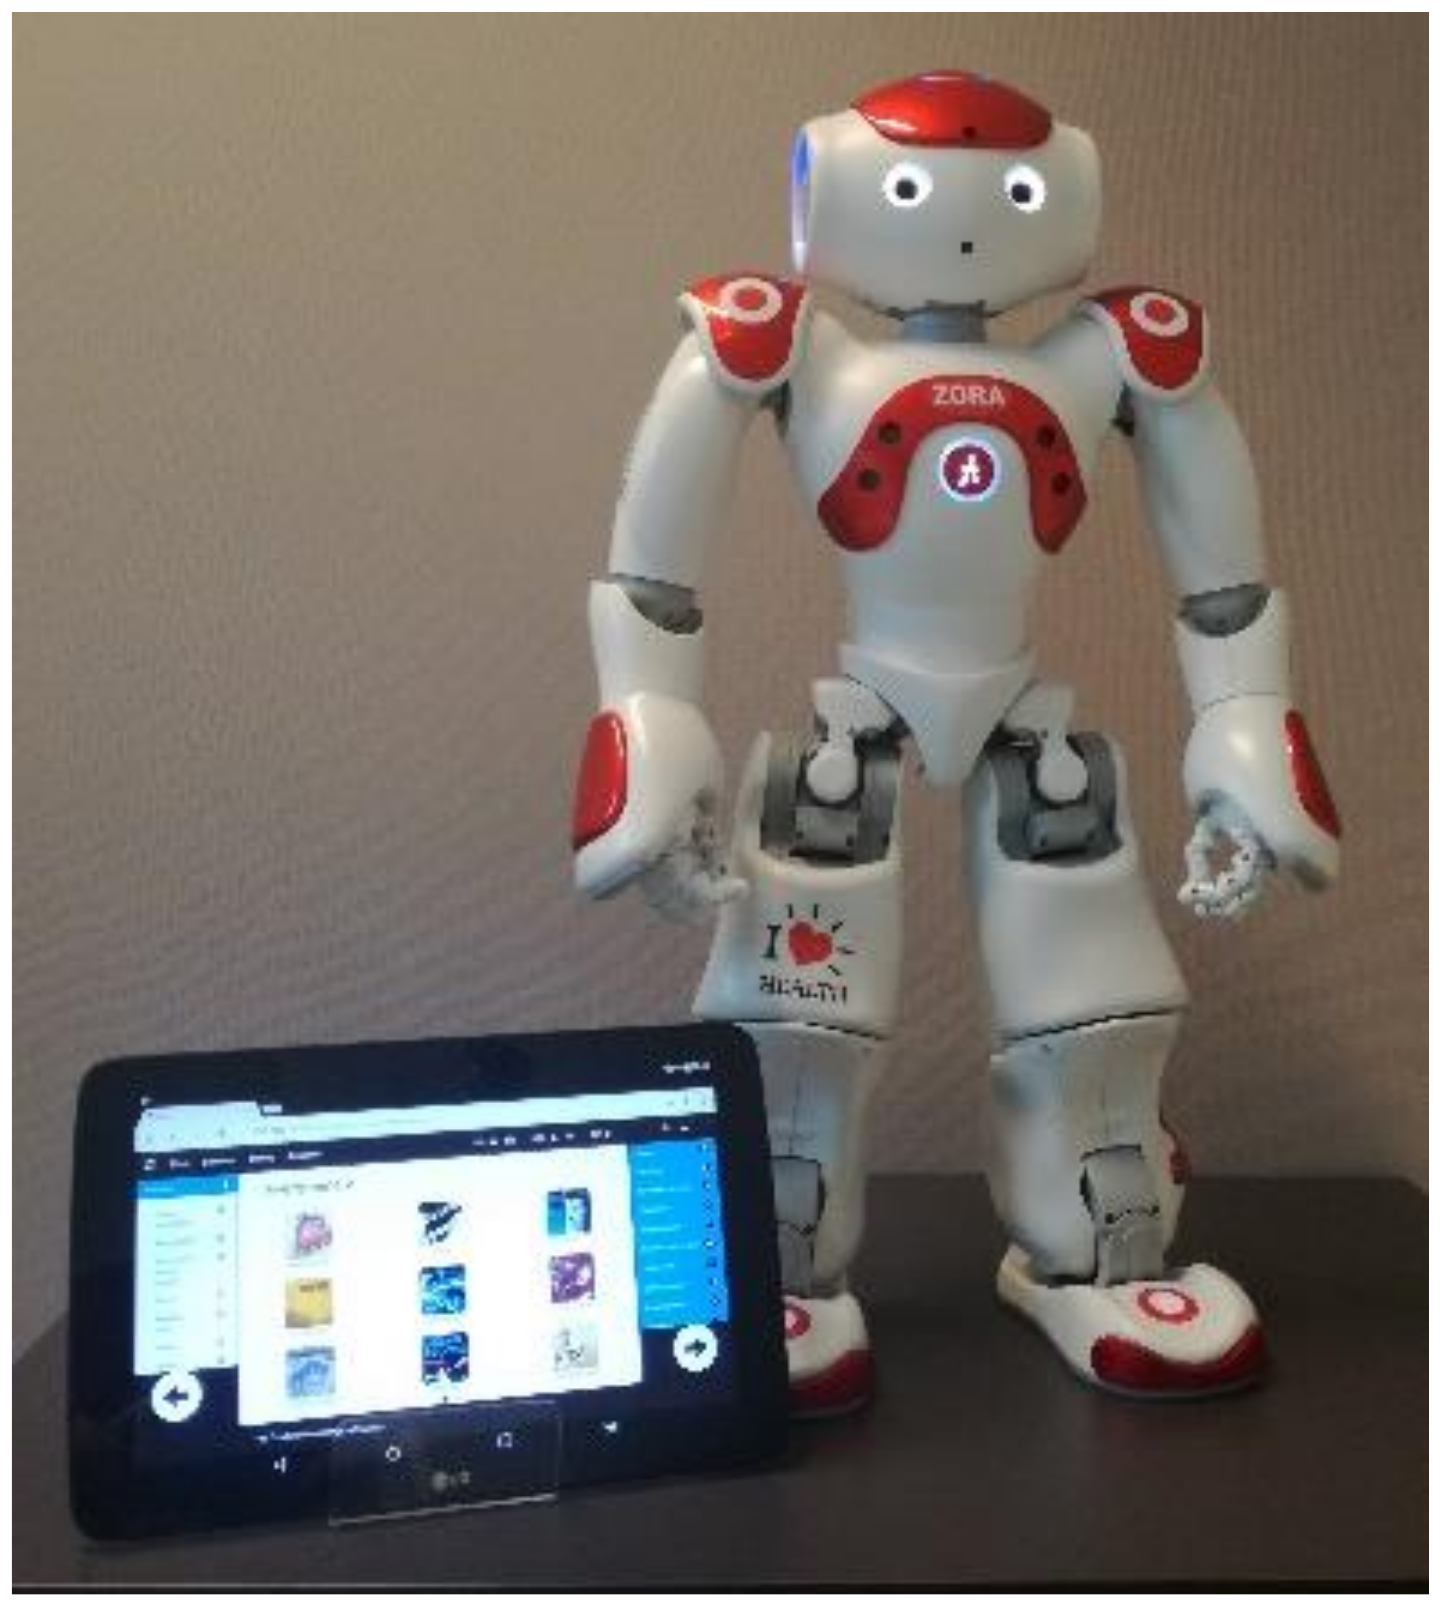 Healthcare | Free Full-Text | Two-Year Use of Care Robot Zora in Dutch  Nursing Homes: An Evaluation Study